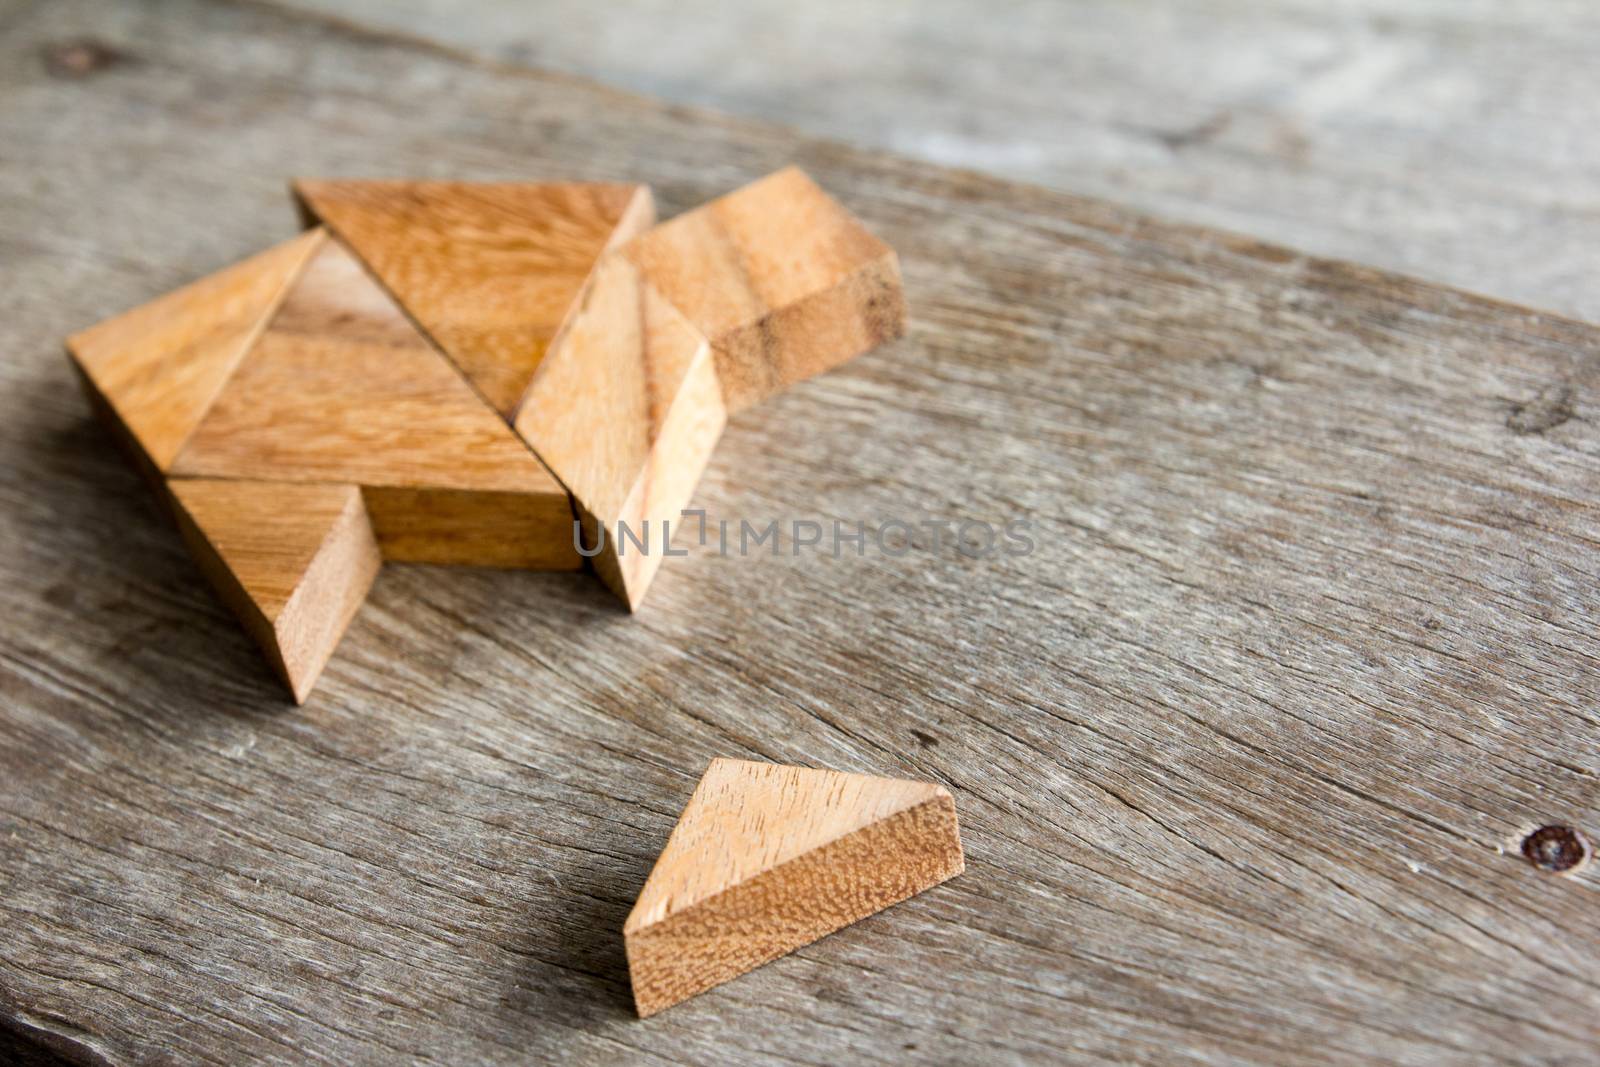 Wooden tangram puzzle wait to fulfill home shape for build dream home or happy life concept